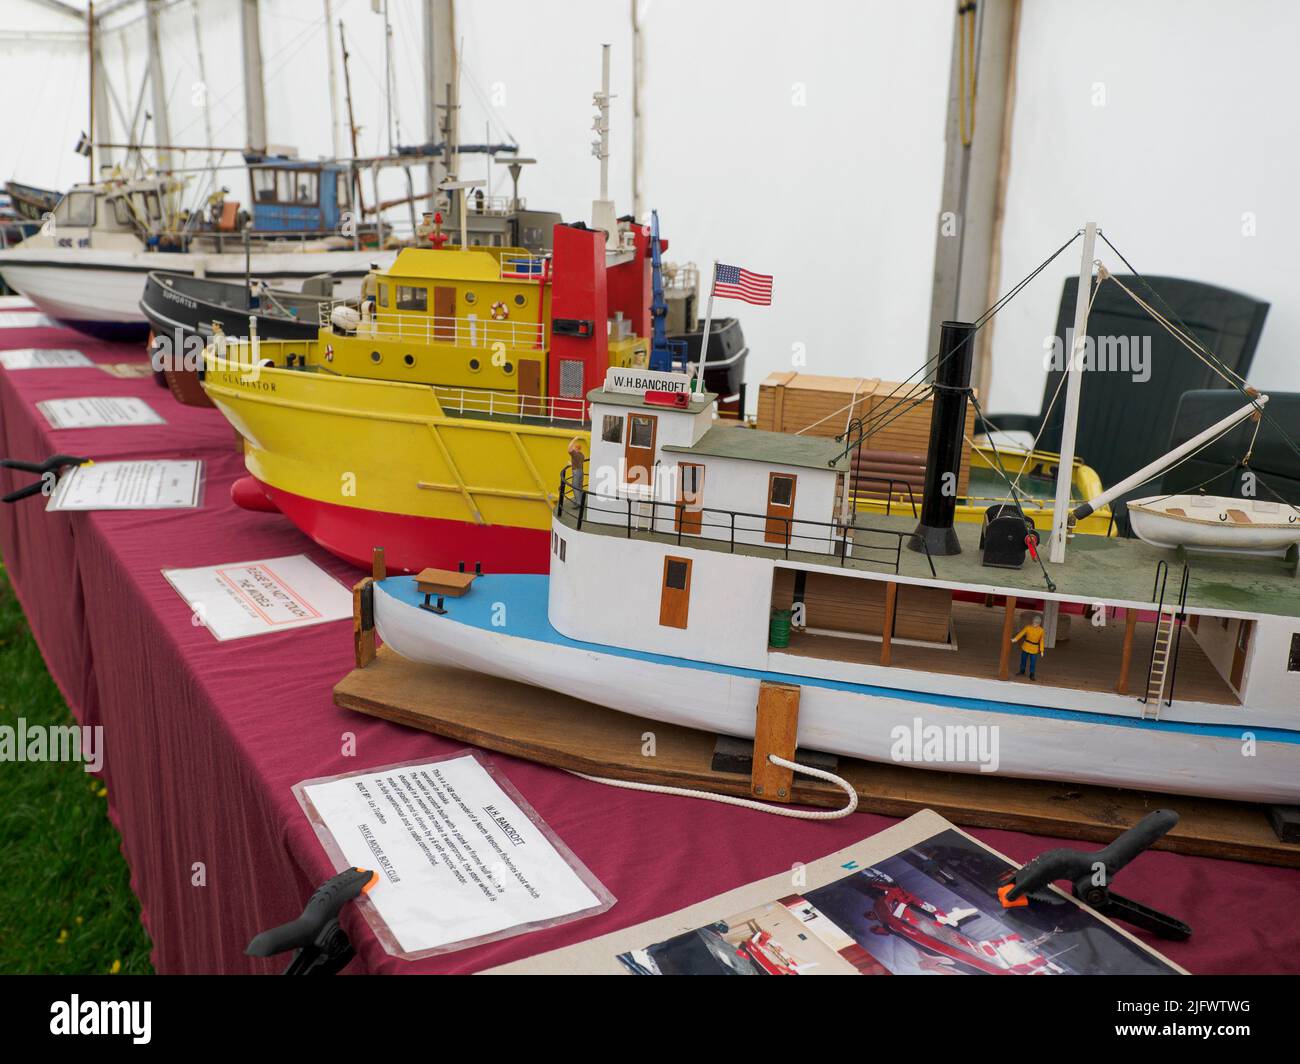 Model boats on display at the Launceston Steam & Vintage Rally, Cornwall, UK Stock Photo